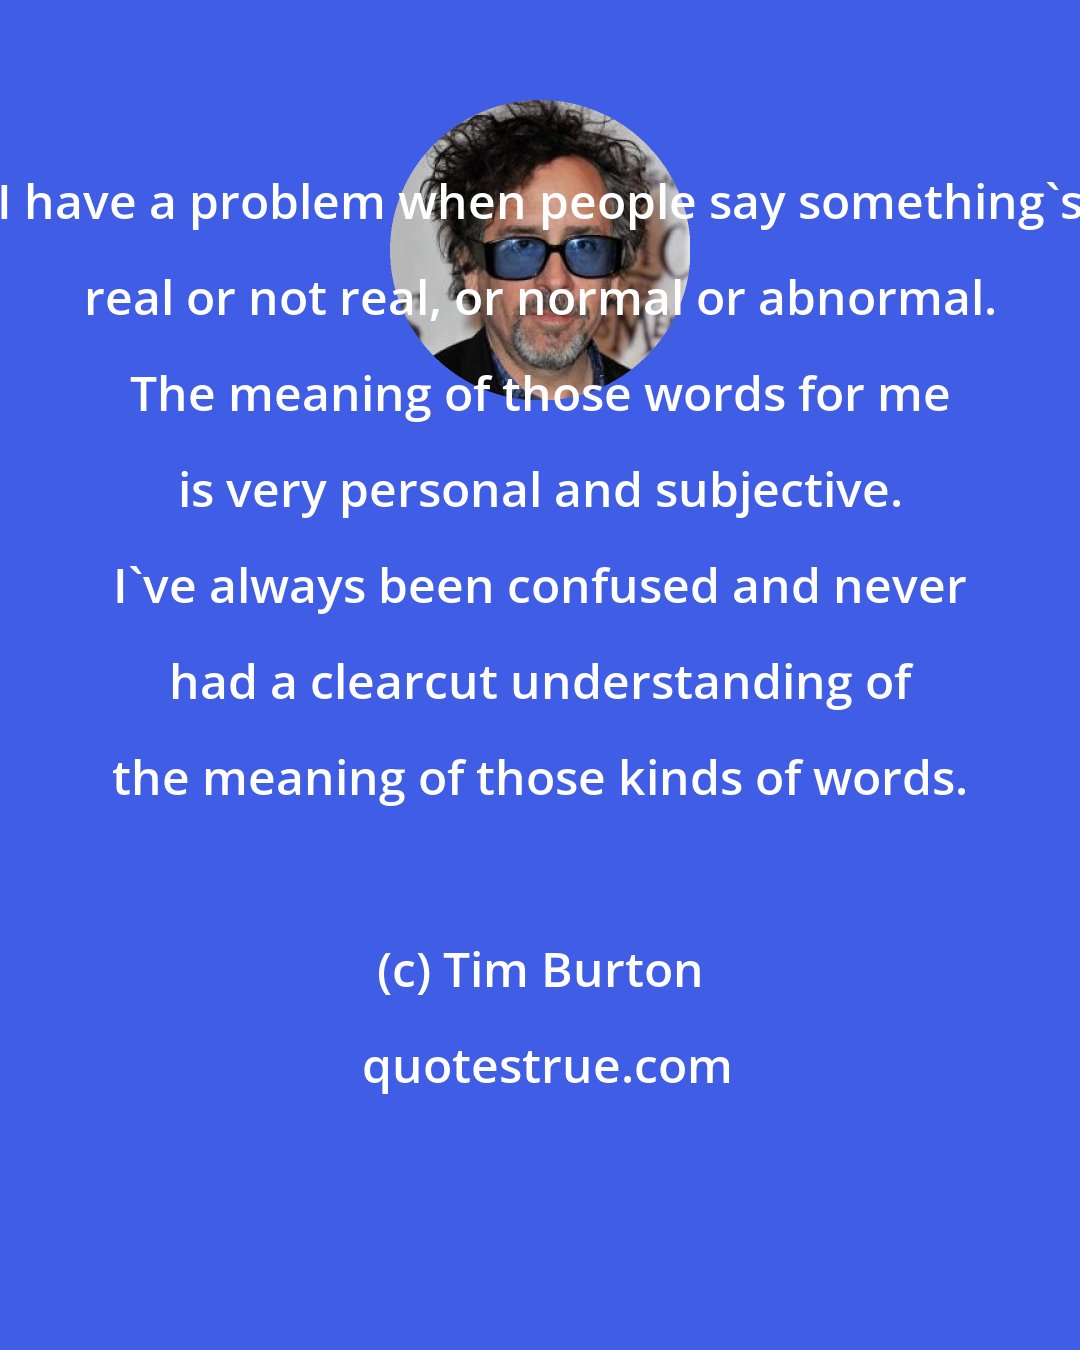 Tim Burton: I have a problem when people say something's real or not real, or normal or abnormal. The meaning of those words for me is very personal and subjective. I've always been confused and never had a clearcut understanding of the meaning of those kinds of words.